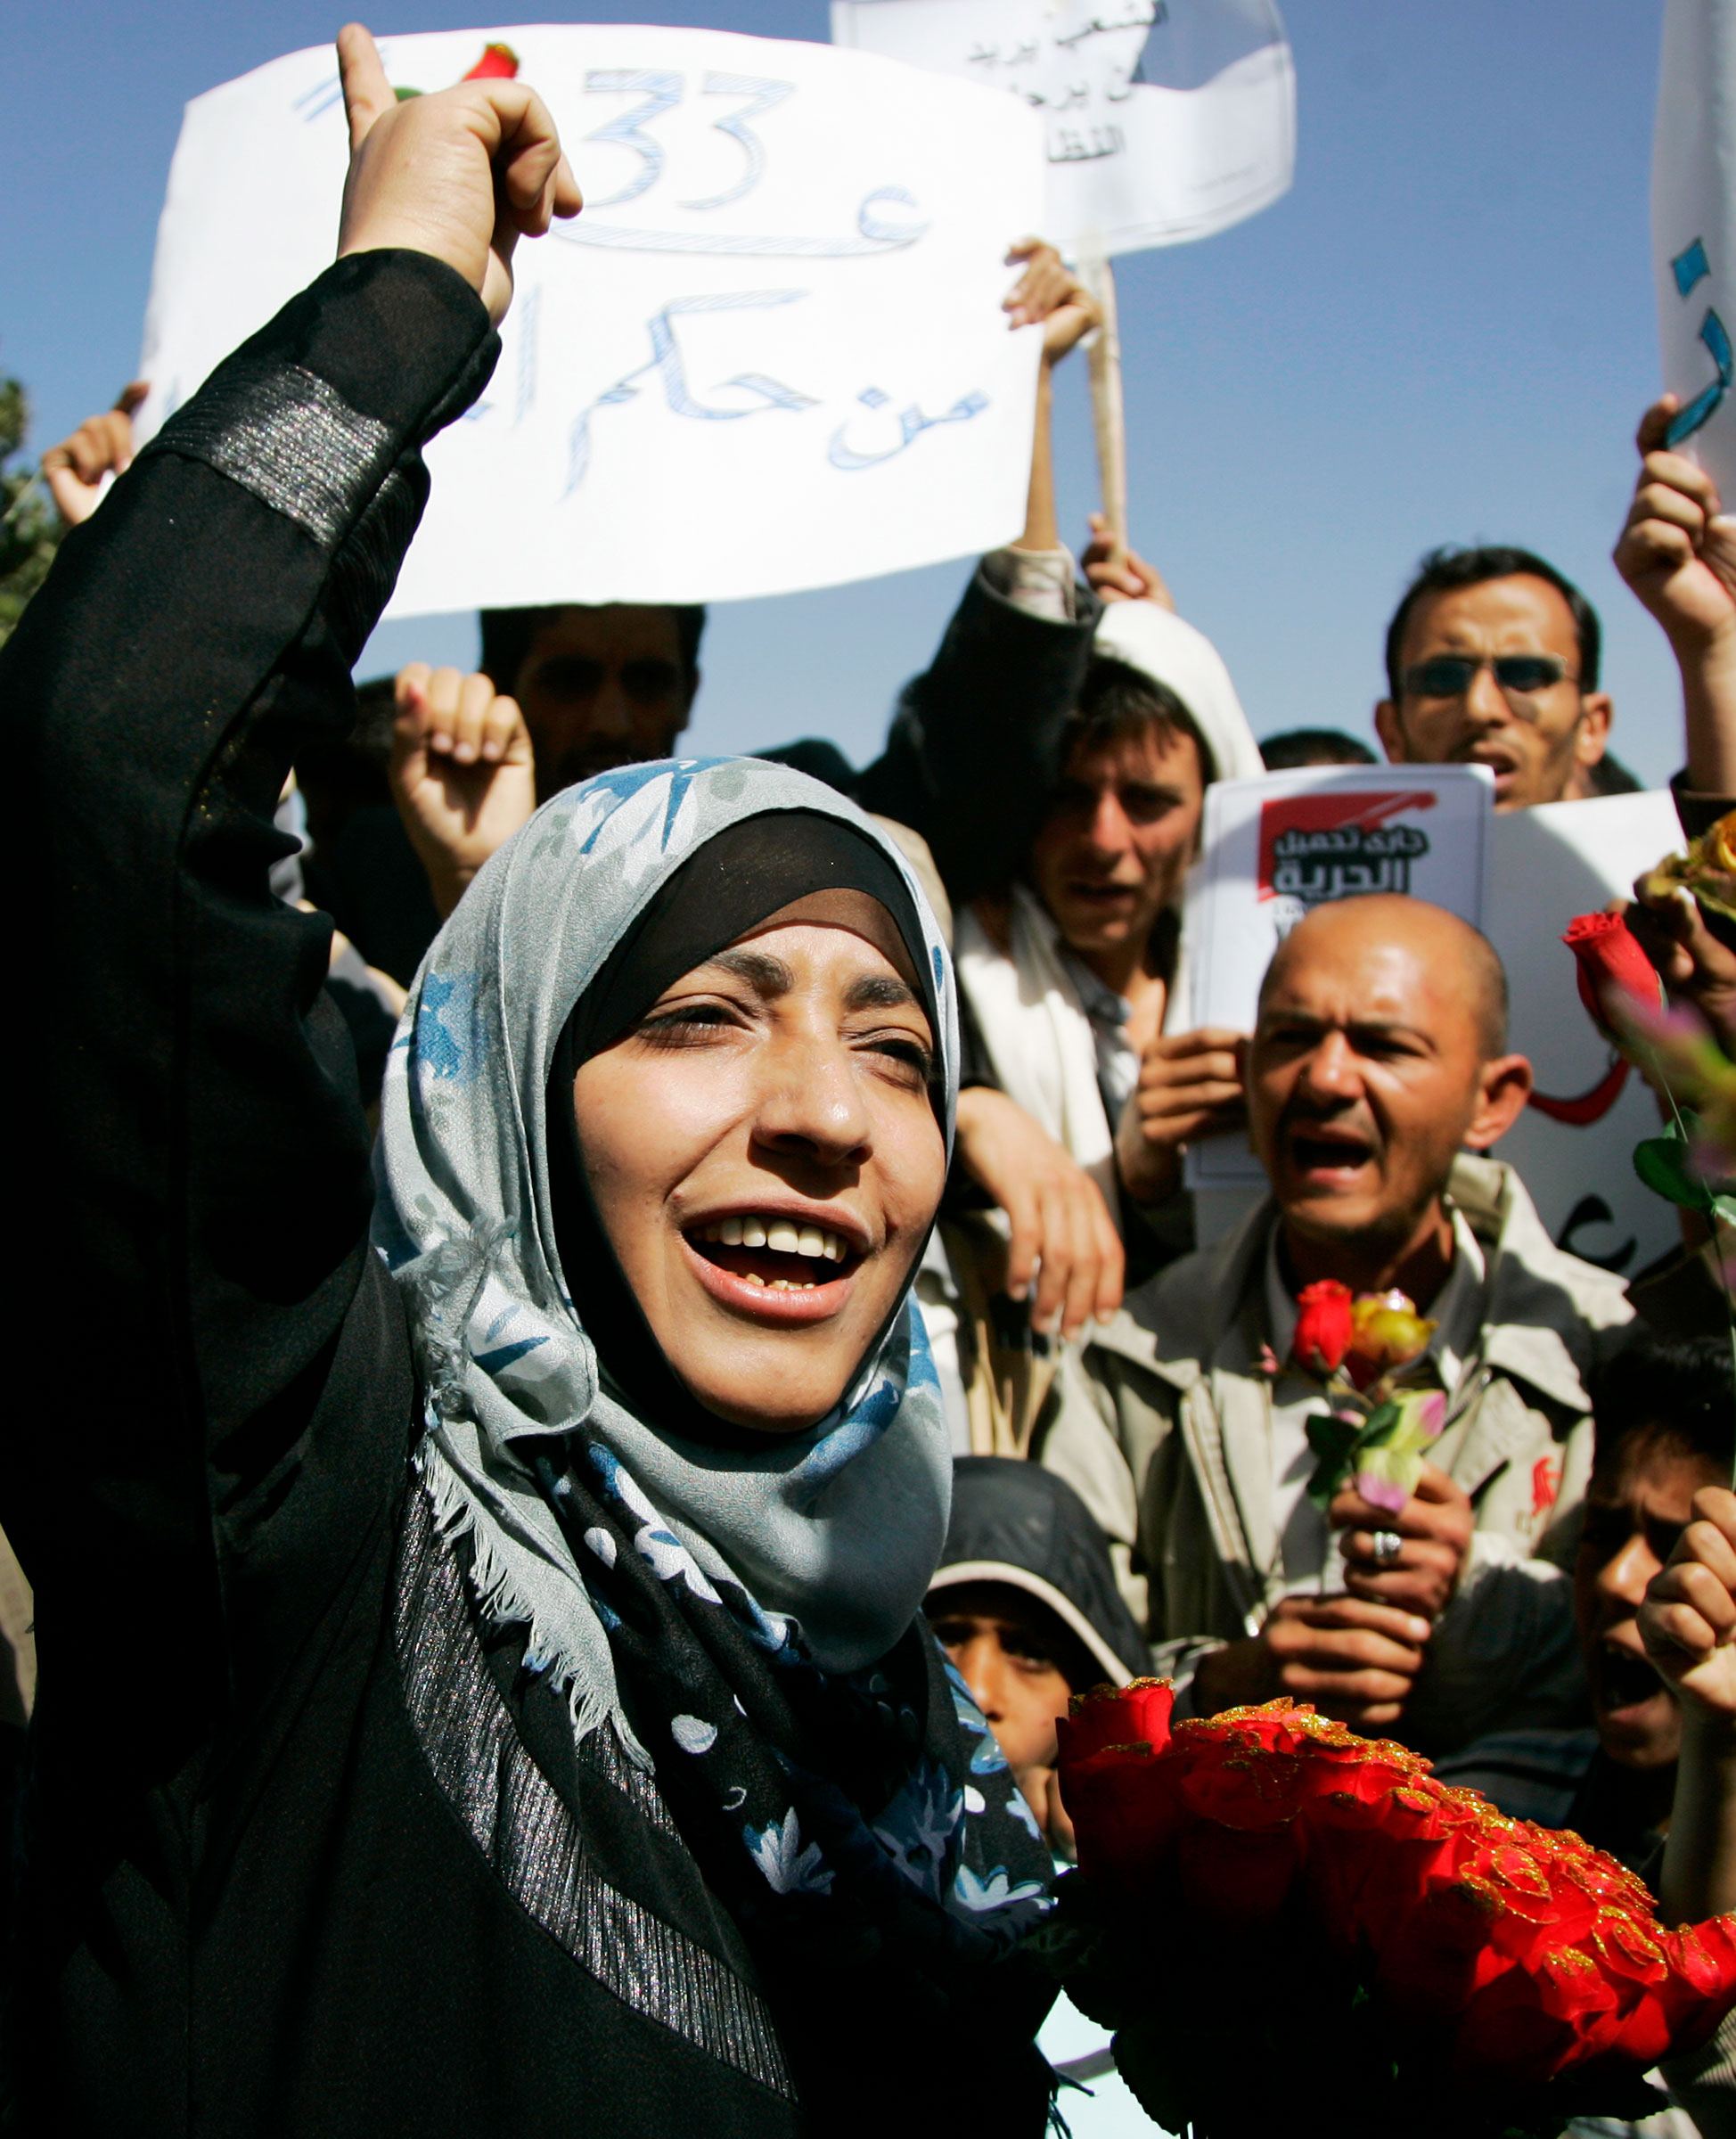 Tawakkol Karman, the chairwoman of Women Journalists without Chains, shouts slogans during an anti-government protest in Sanaa February 10, 2011. (Khaled Abdullah—Reuters)